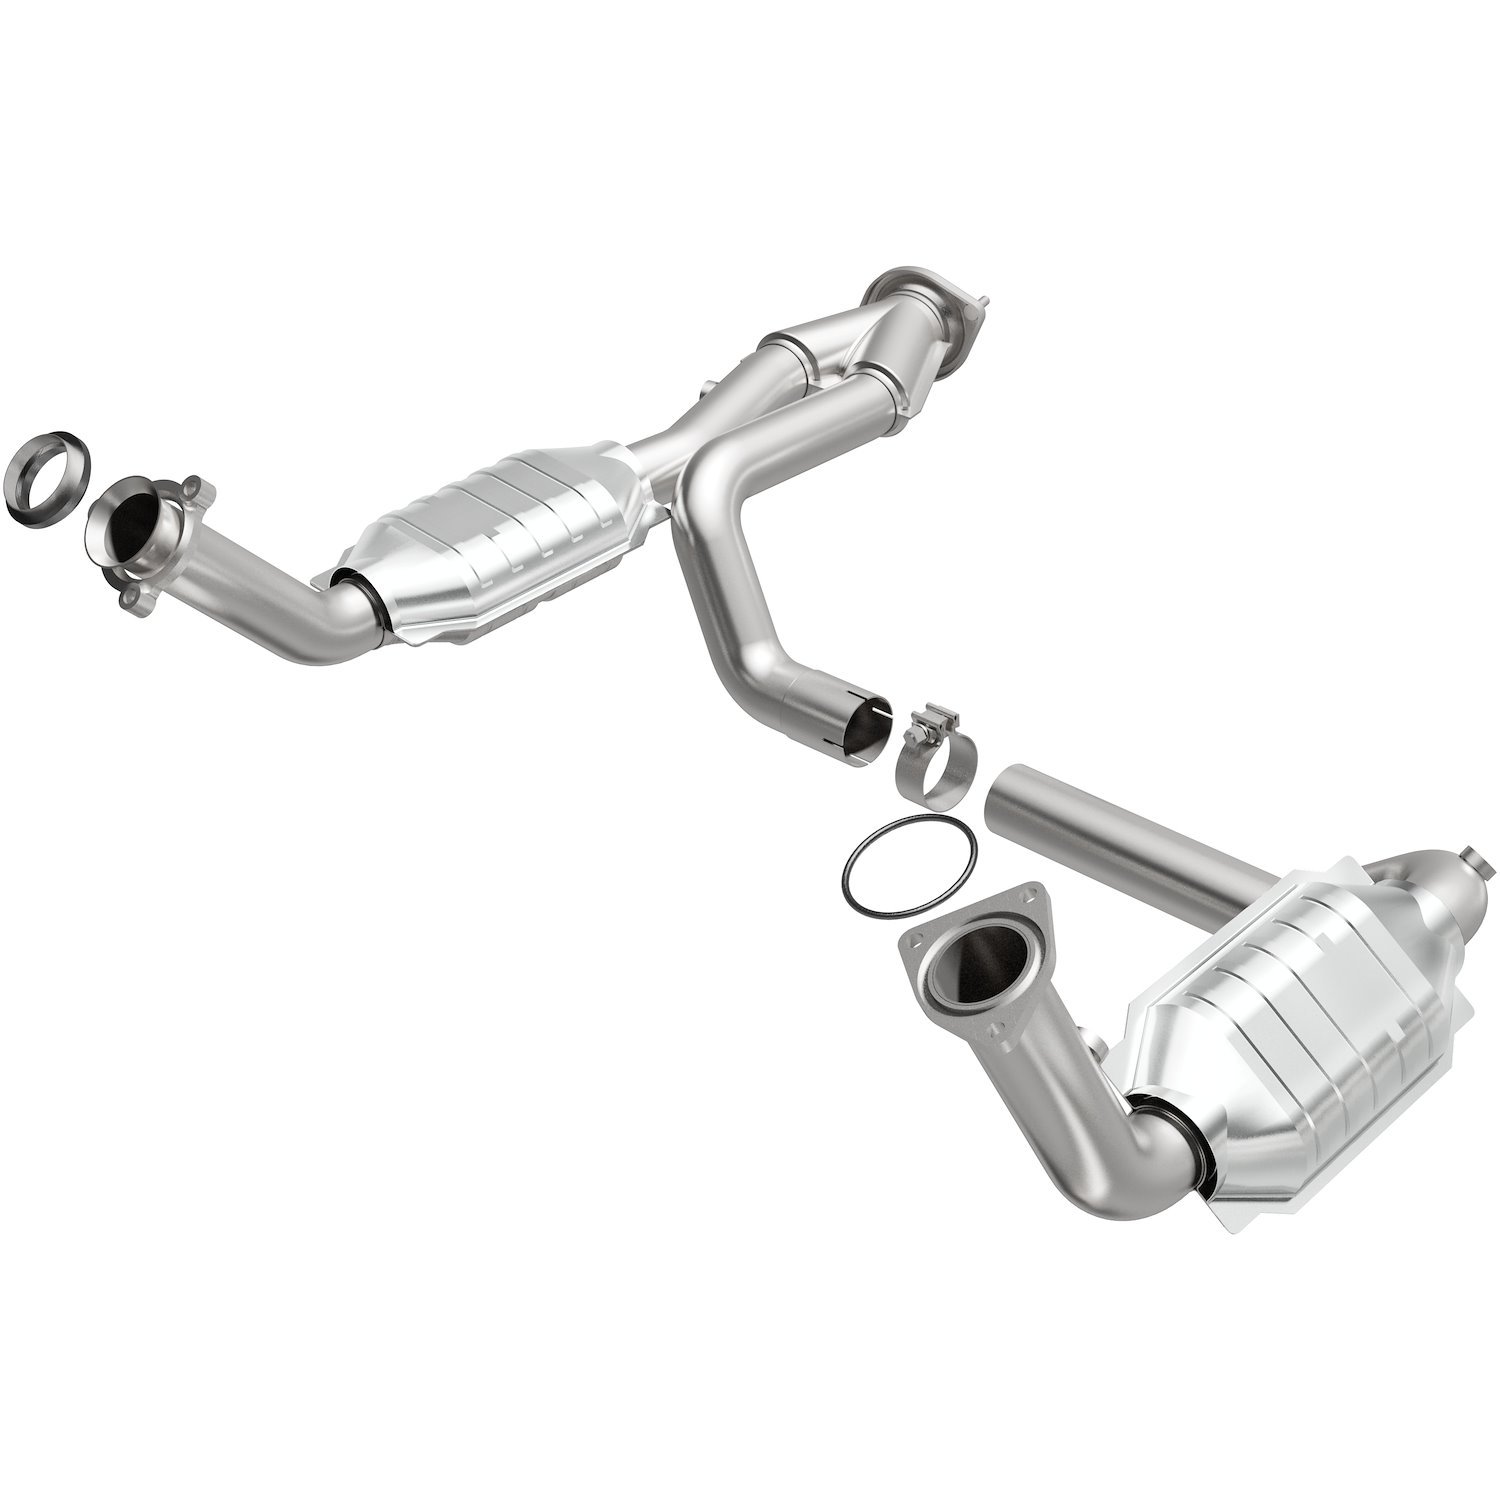 Direct-Fit Catalytic Converter 1999-2007 Chevy/GMC Truck 2WD 4.3L/4.8L/5.3L